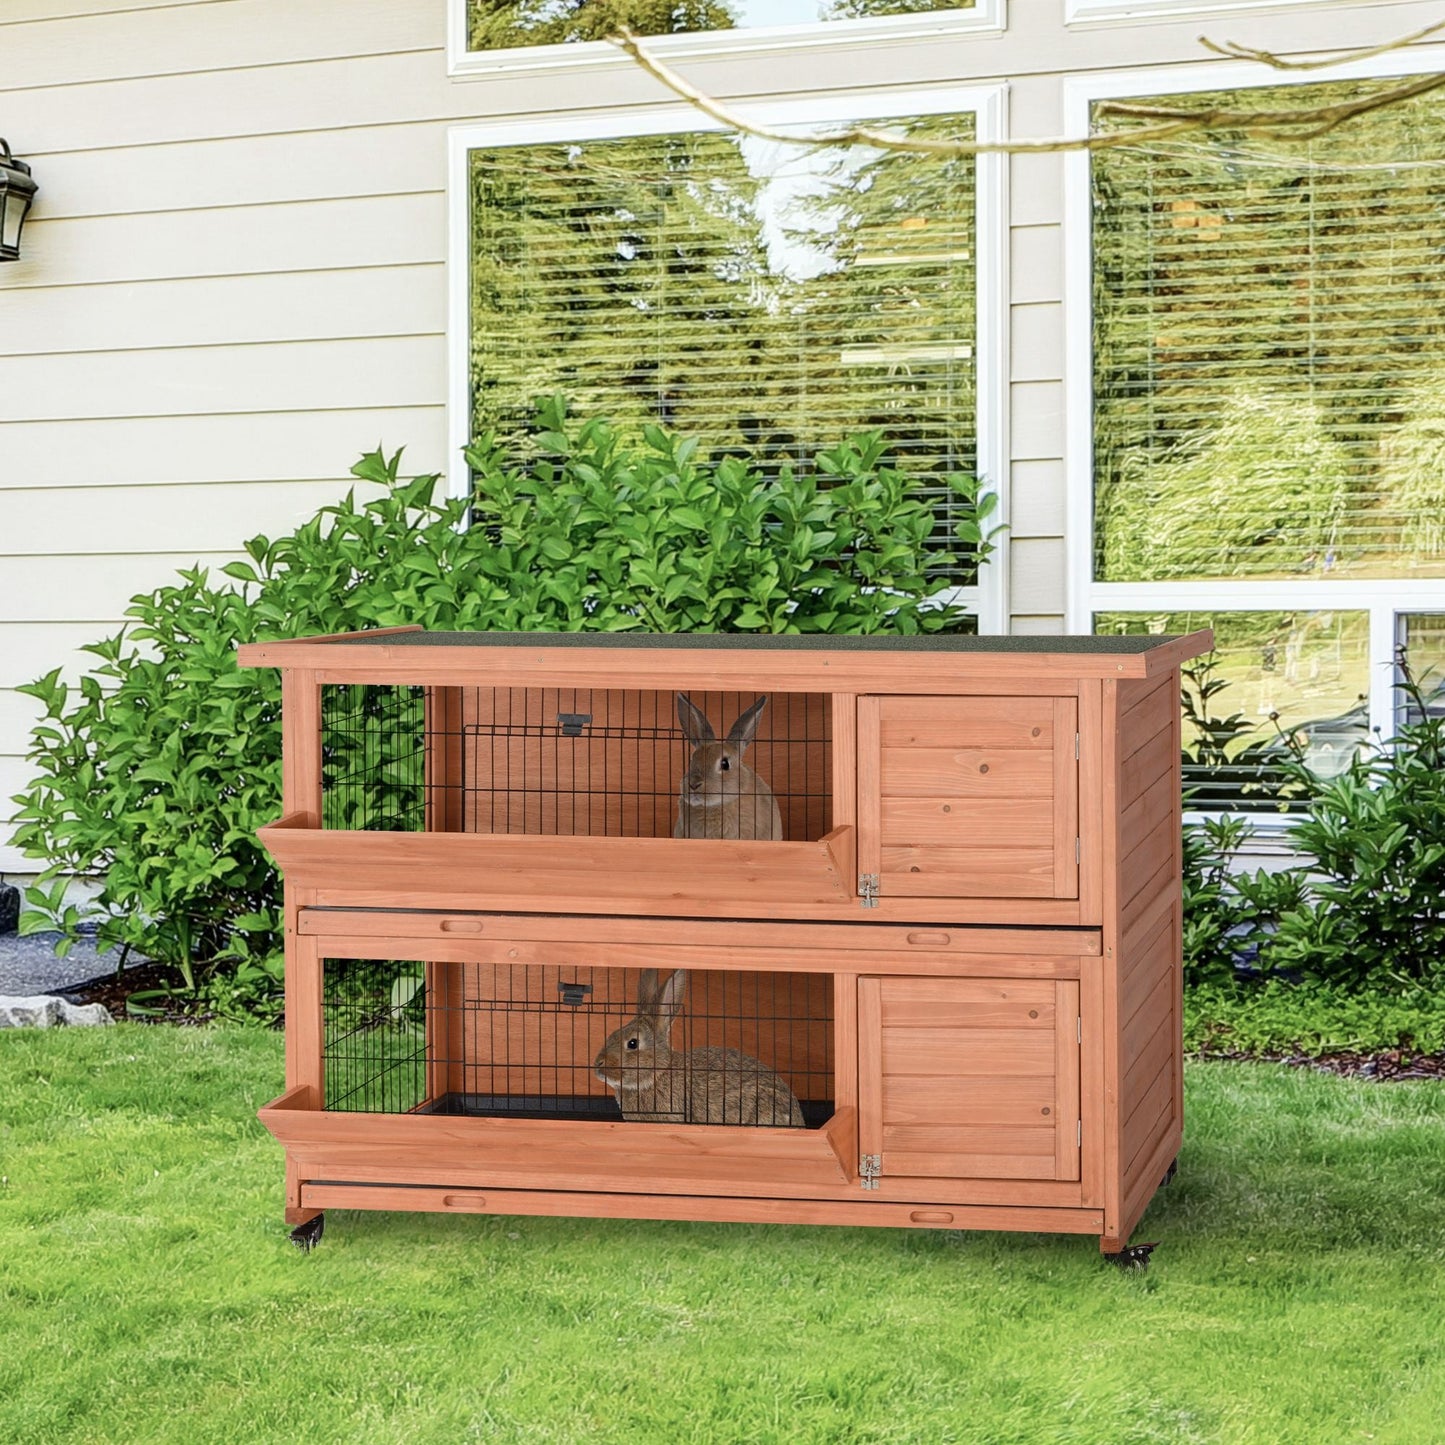 -PawHut 54" 2-Story Rabbit Hutch Indoor Bunny Hutch Outdoor Small Animal House with Pull Out Tray, Wheels, Feeding Troughs - Outdoor Style Company